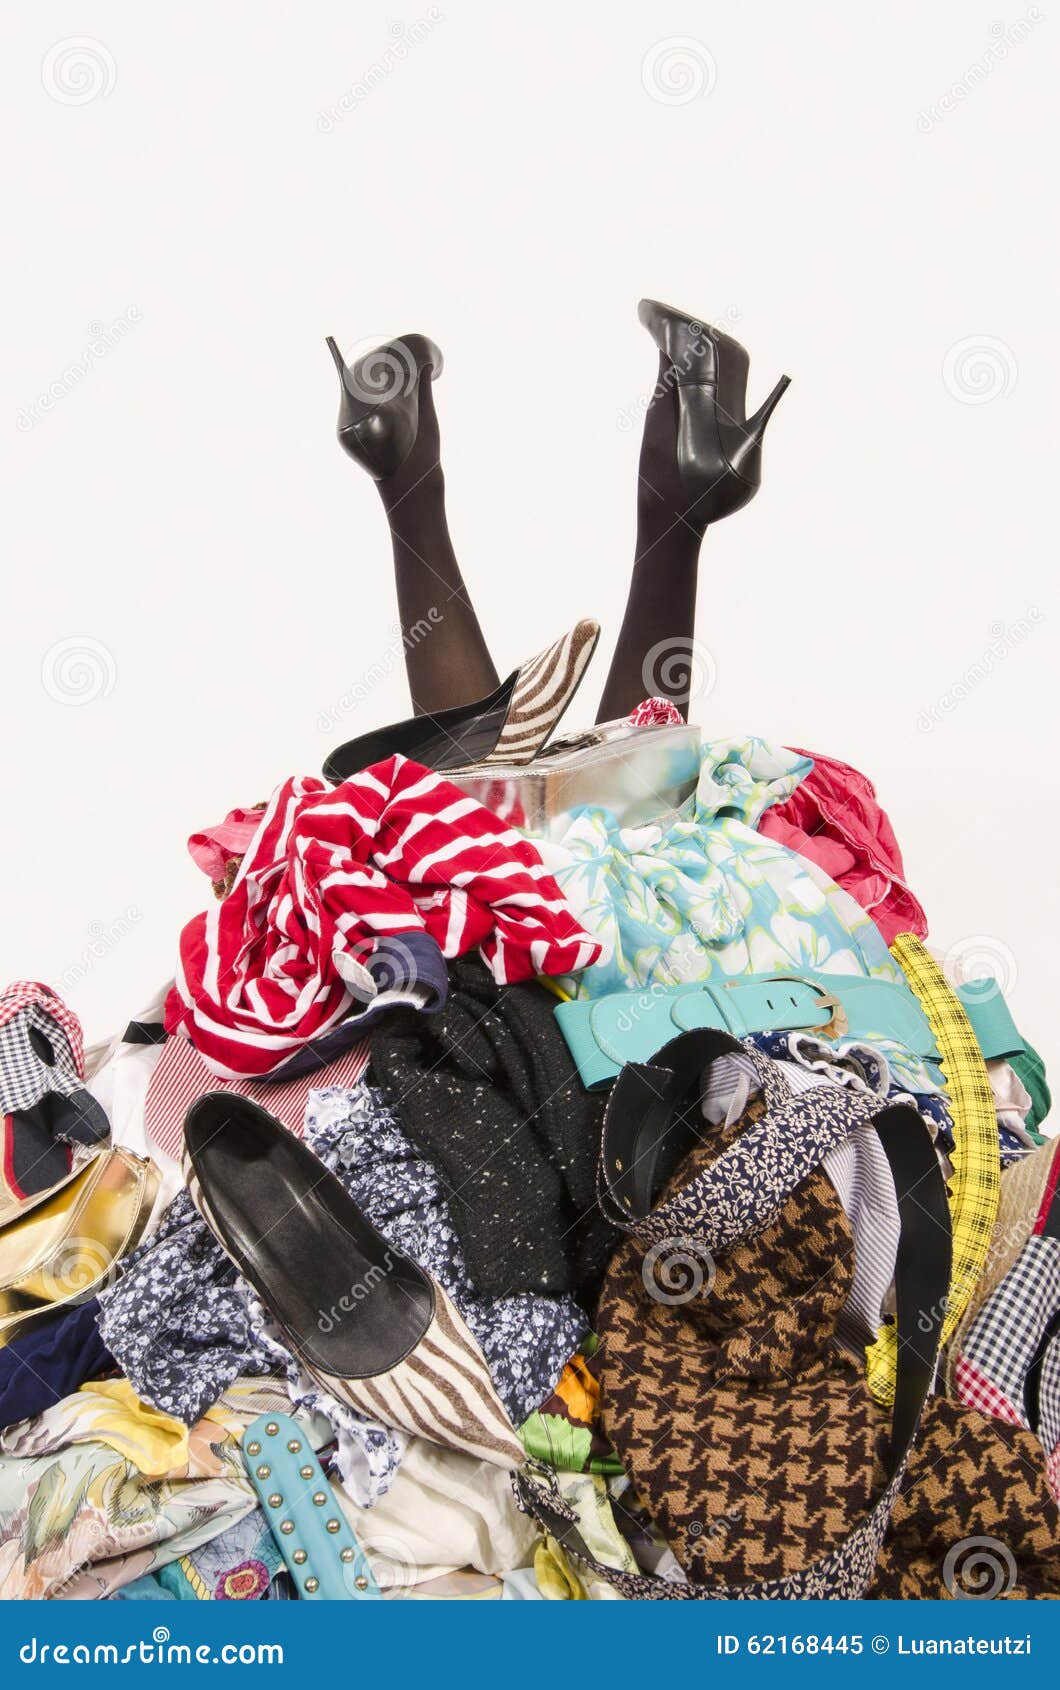 woman legs reaching out from a big pile of clothes and accessories.